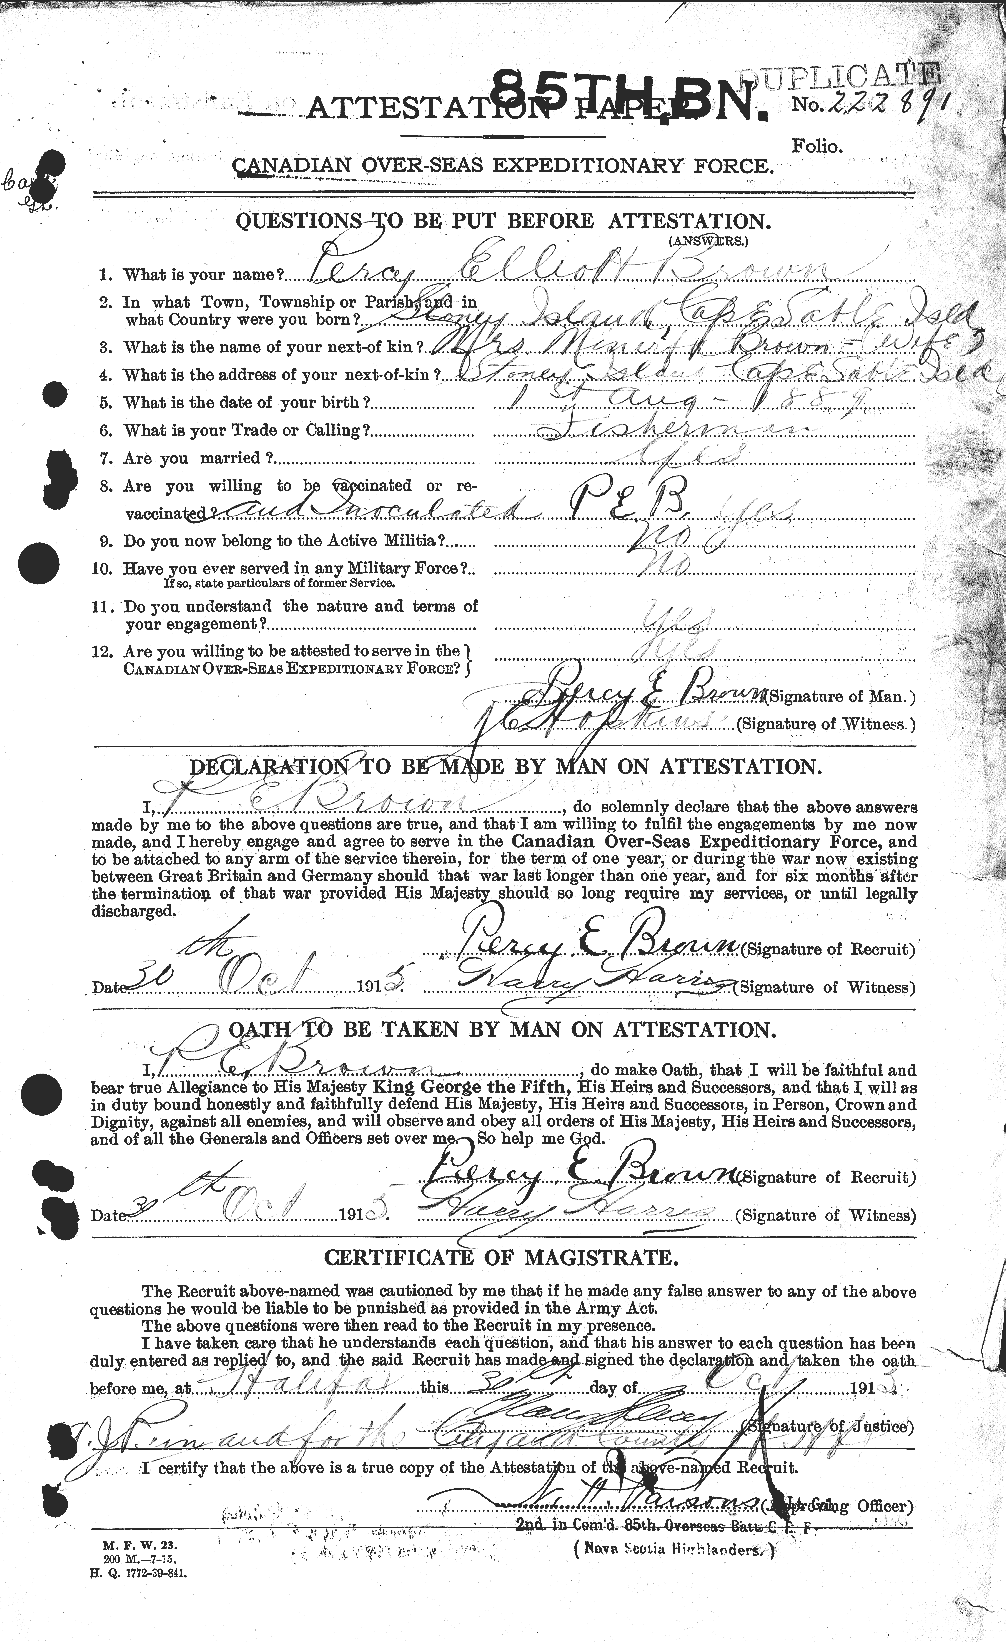 Personnel Records of the First World War - CEF 267168a